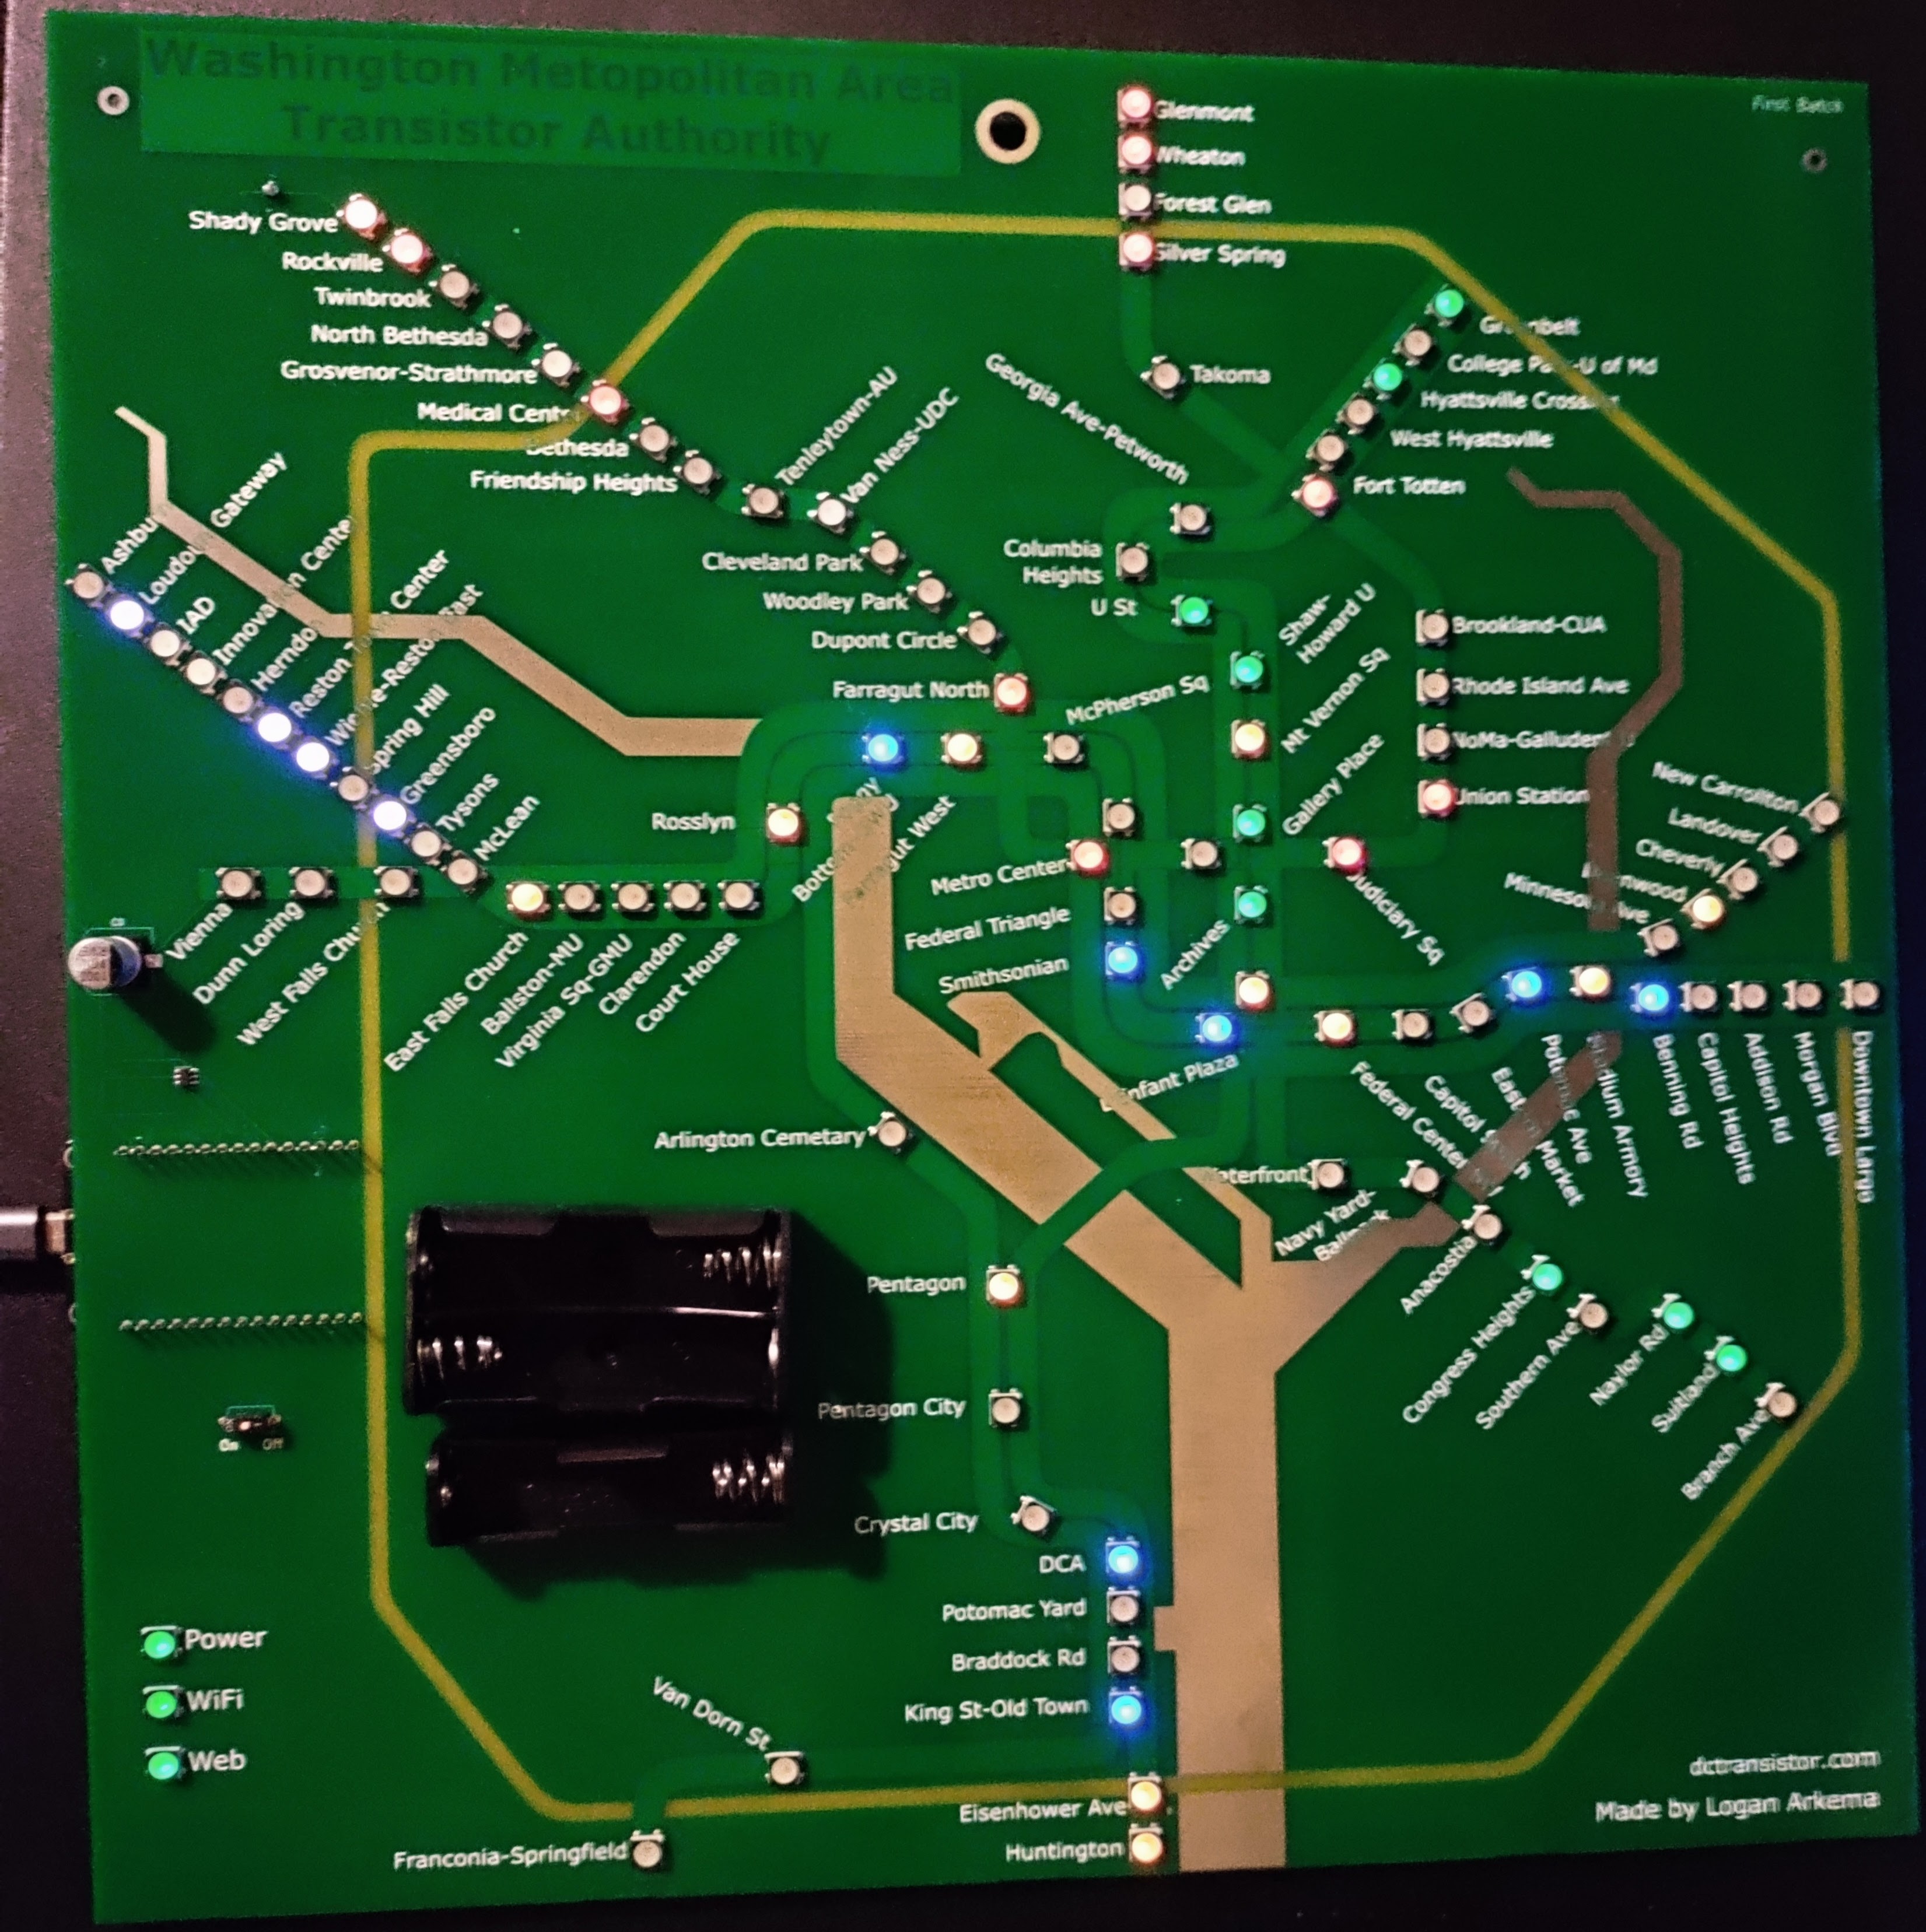 Large picture of a Development DCTransistor board, powered on to show live train positions. The board is programmable circuit board, mostly light green except for a dark green title and dark green rectangles representing the DC metro train lines, a beige boundary representing the beltway, and silver representing the Potomac and Anacostia rivers. It is designed to represent the DC Metro System map. As an older board, it has far less refined silk screen aesthetics and looks much more shoddy compared to the Bidirectional and Standard boards.